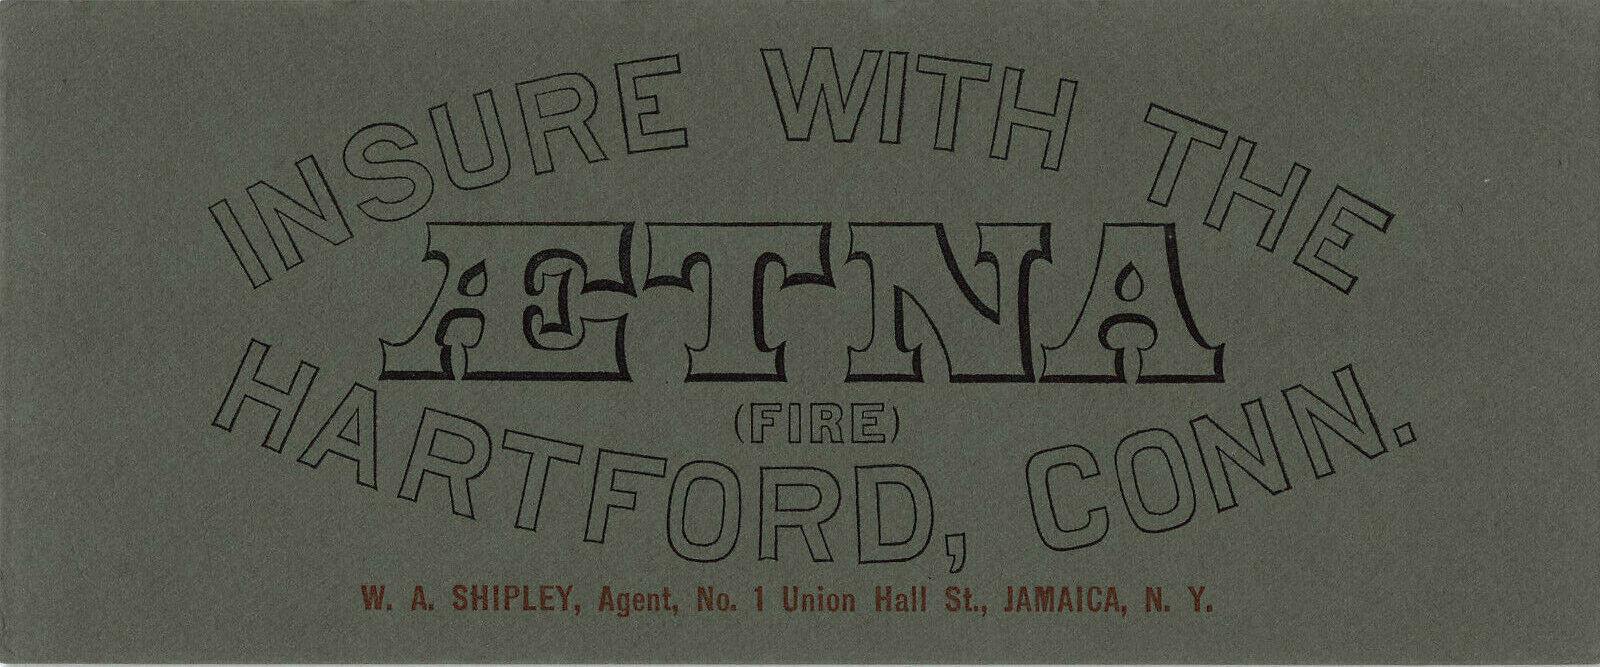 Insure With The Aetna (Fire), Hartford, Connecticut, Early Ink Blotter, Unused